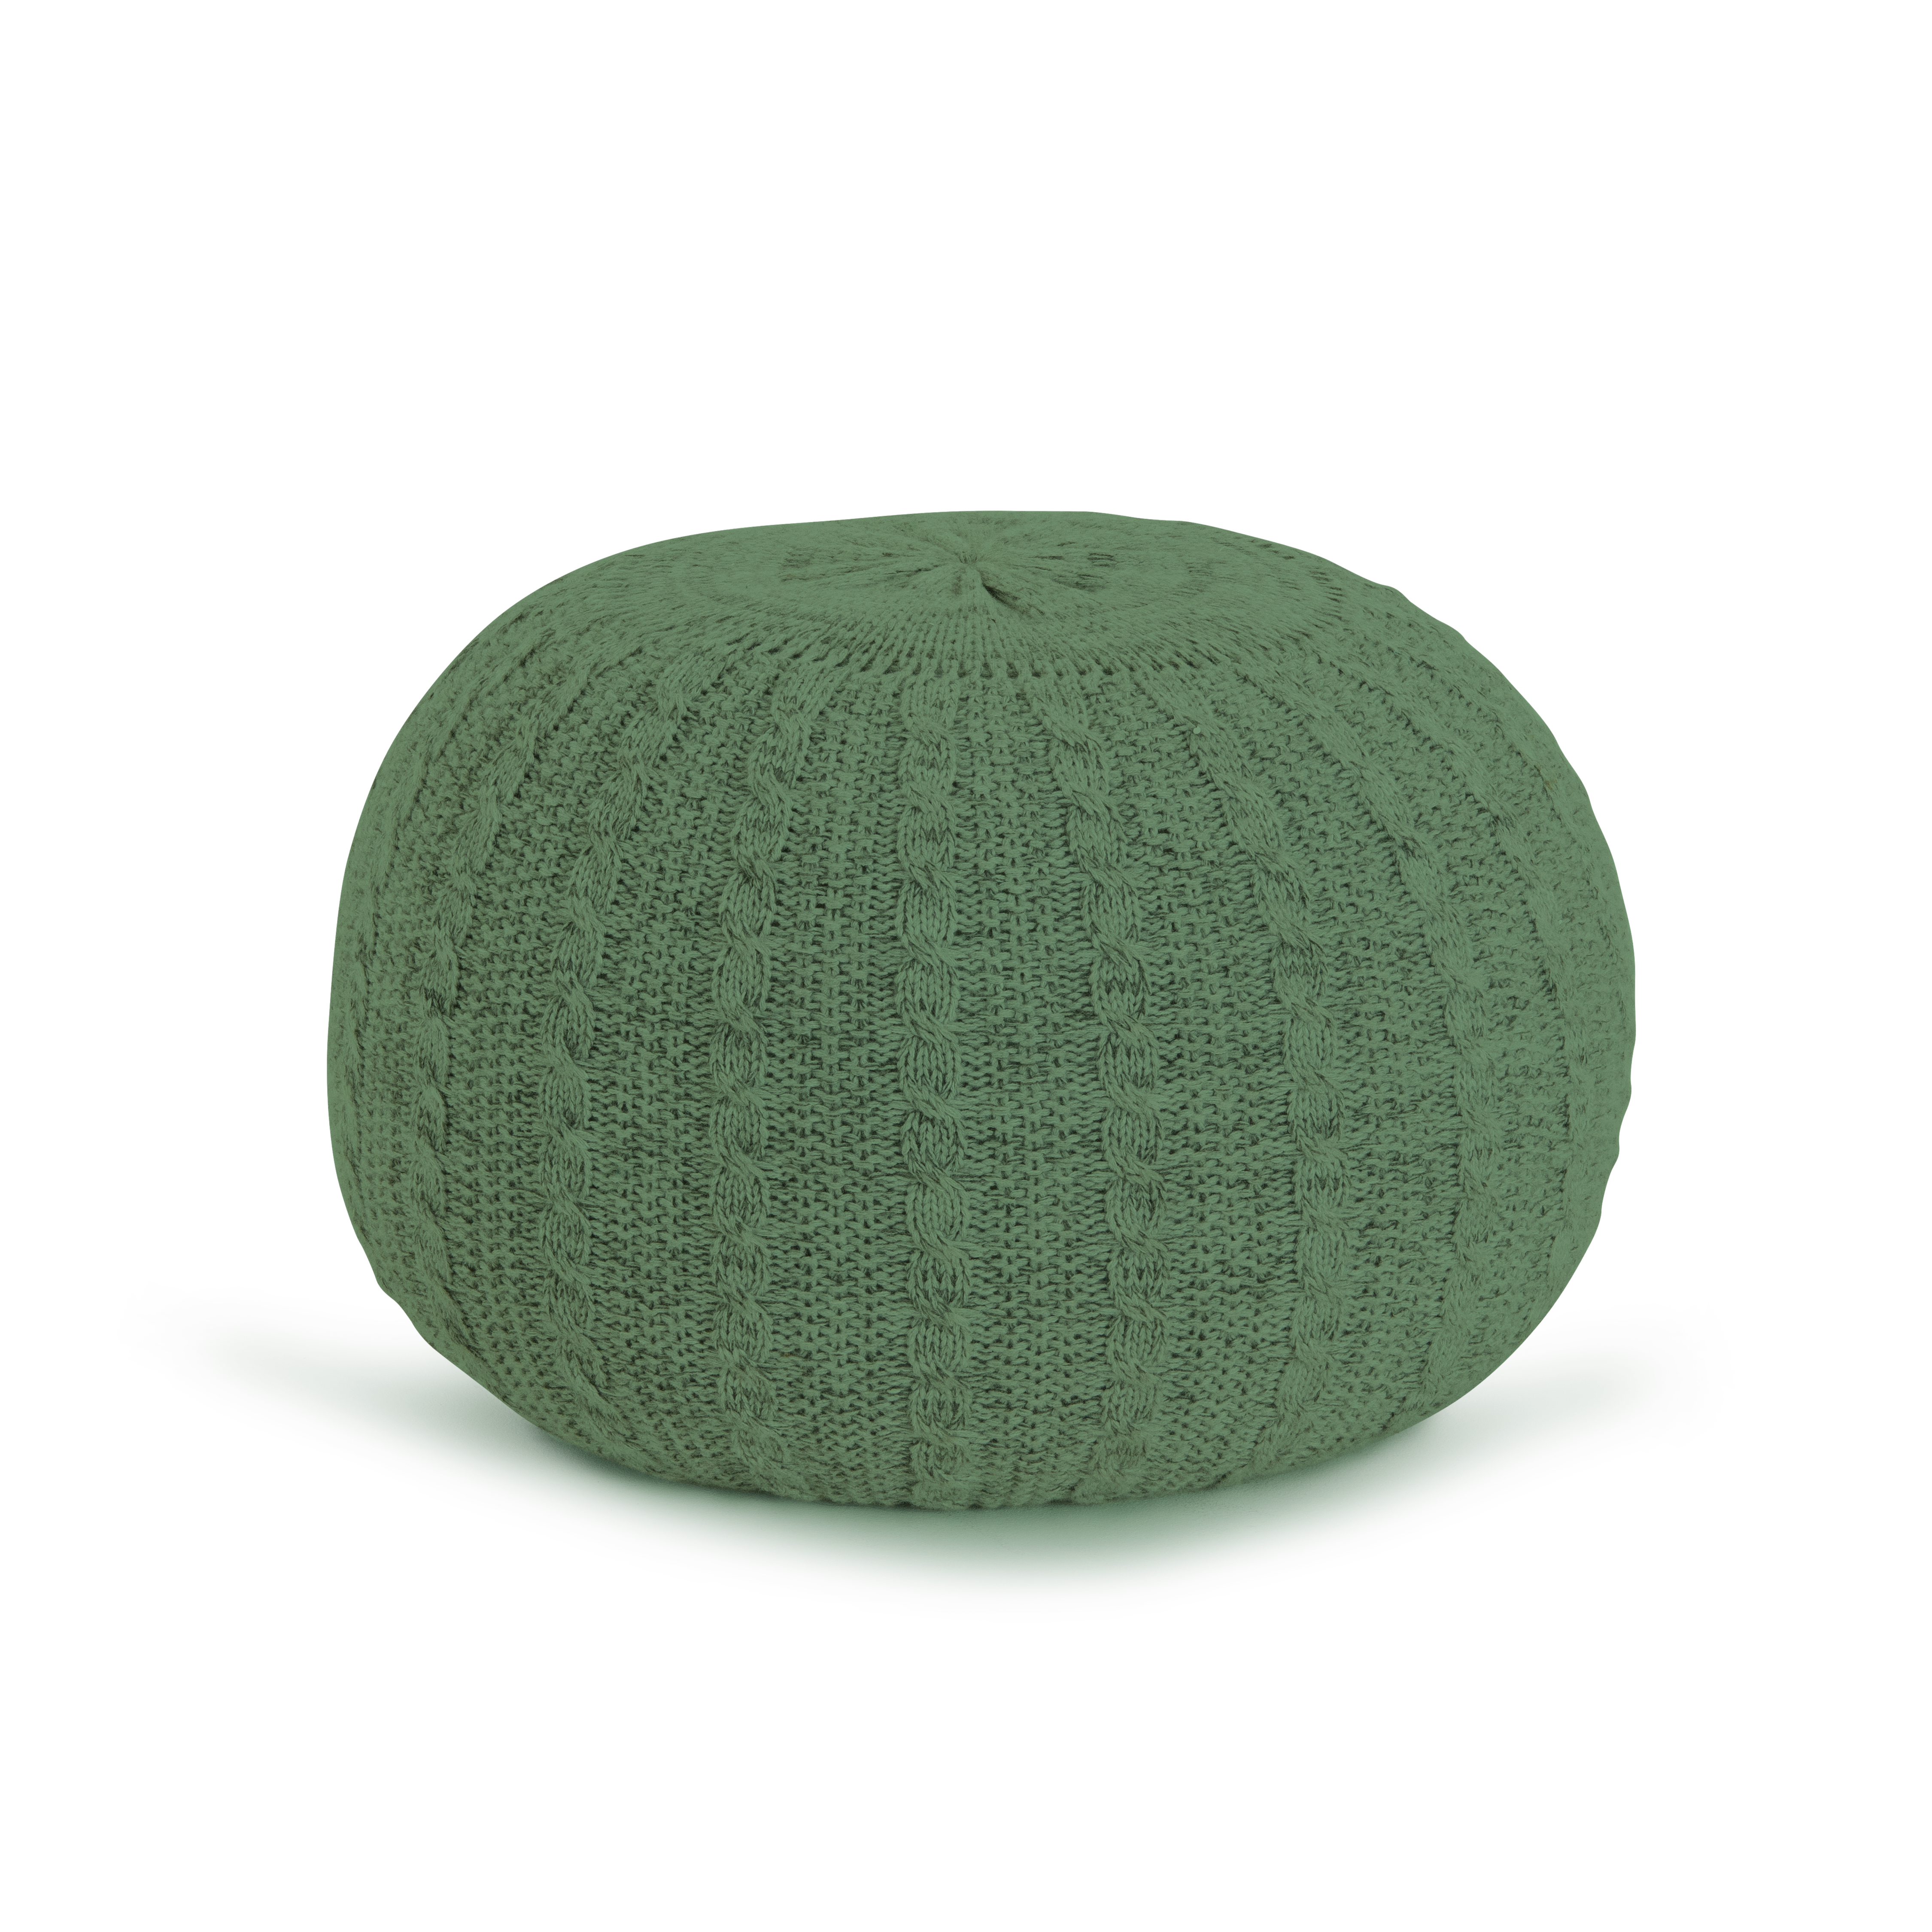 Tutti Bambini Knitted Pouffe - Sage Green - For Your Little One